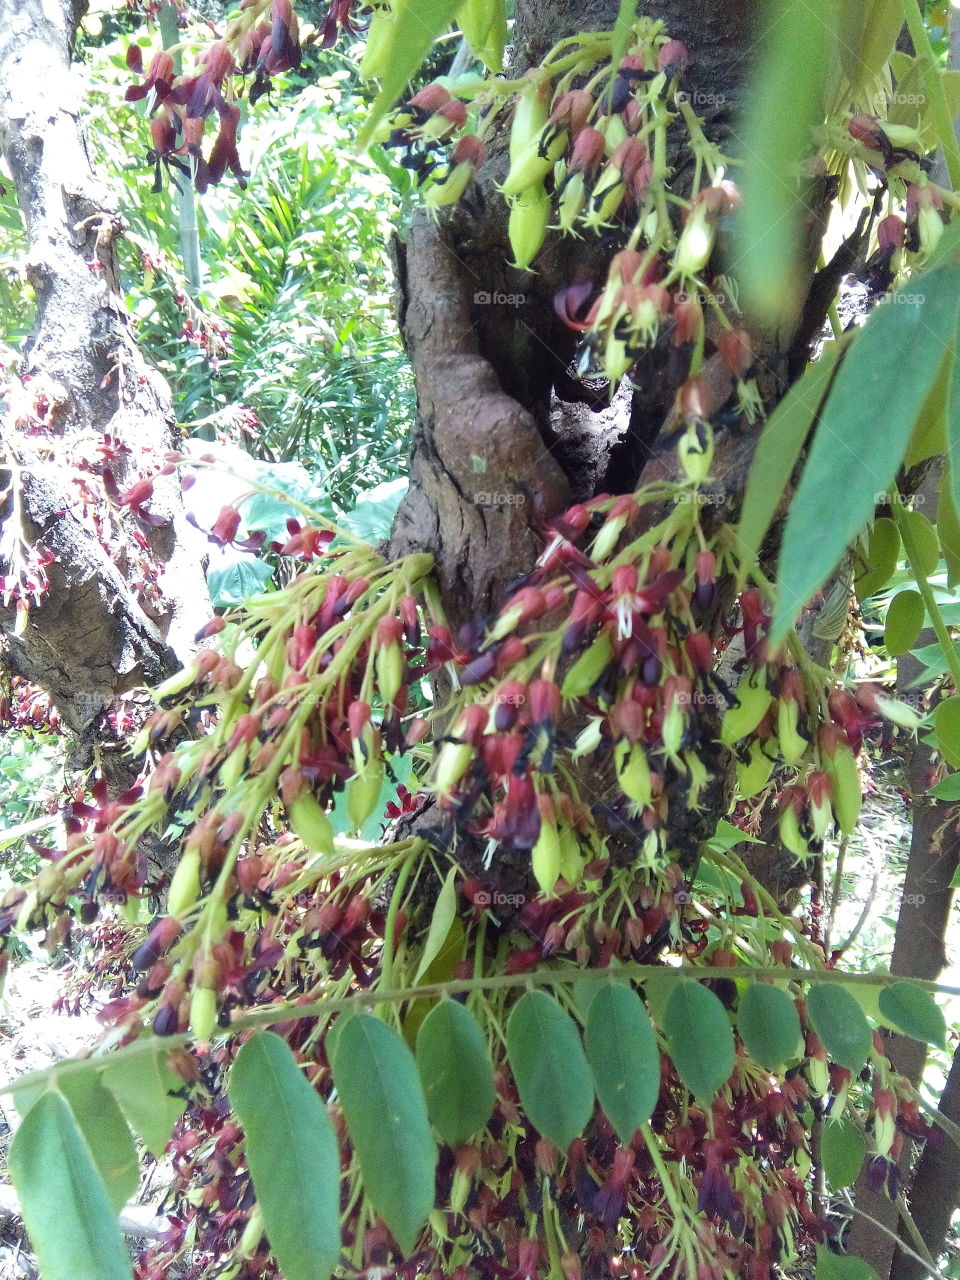 kamias also known as Averrhoa Bilimbi, cucumber tree  or tree sorrel.  full of fruits from near roots to branches